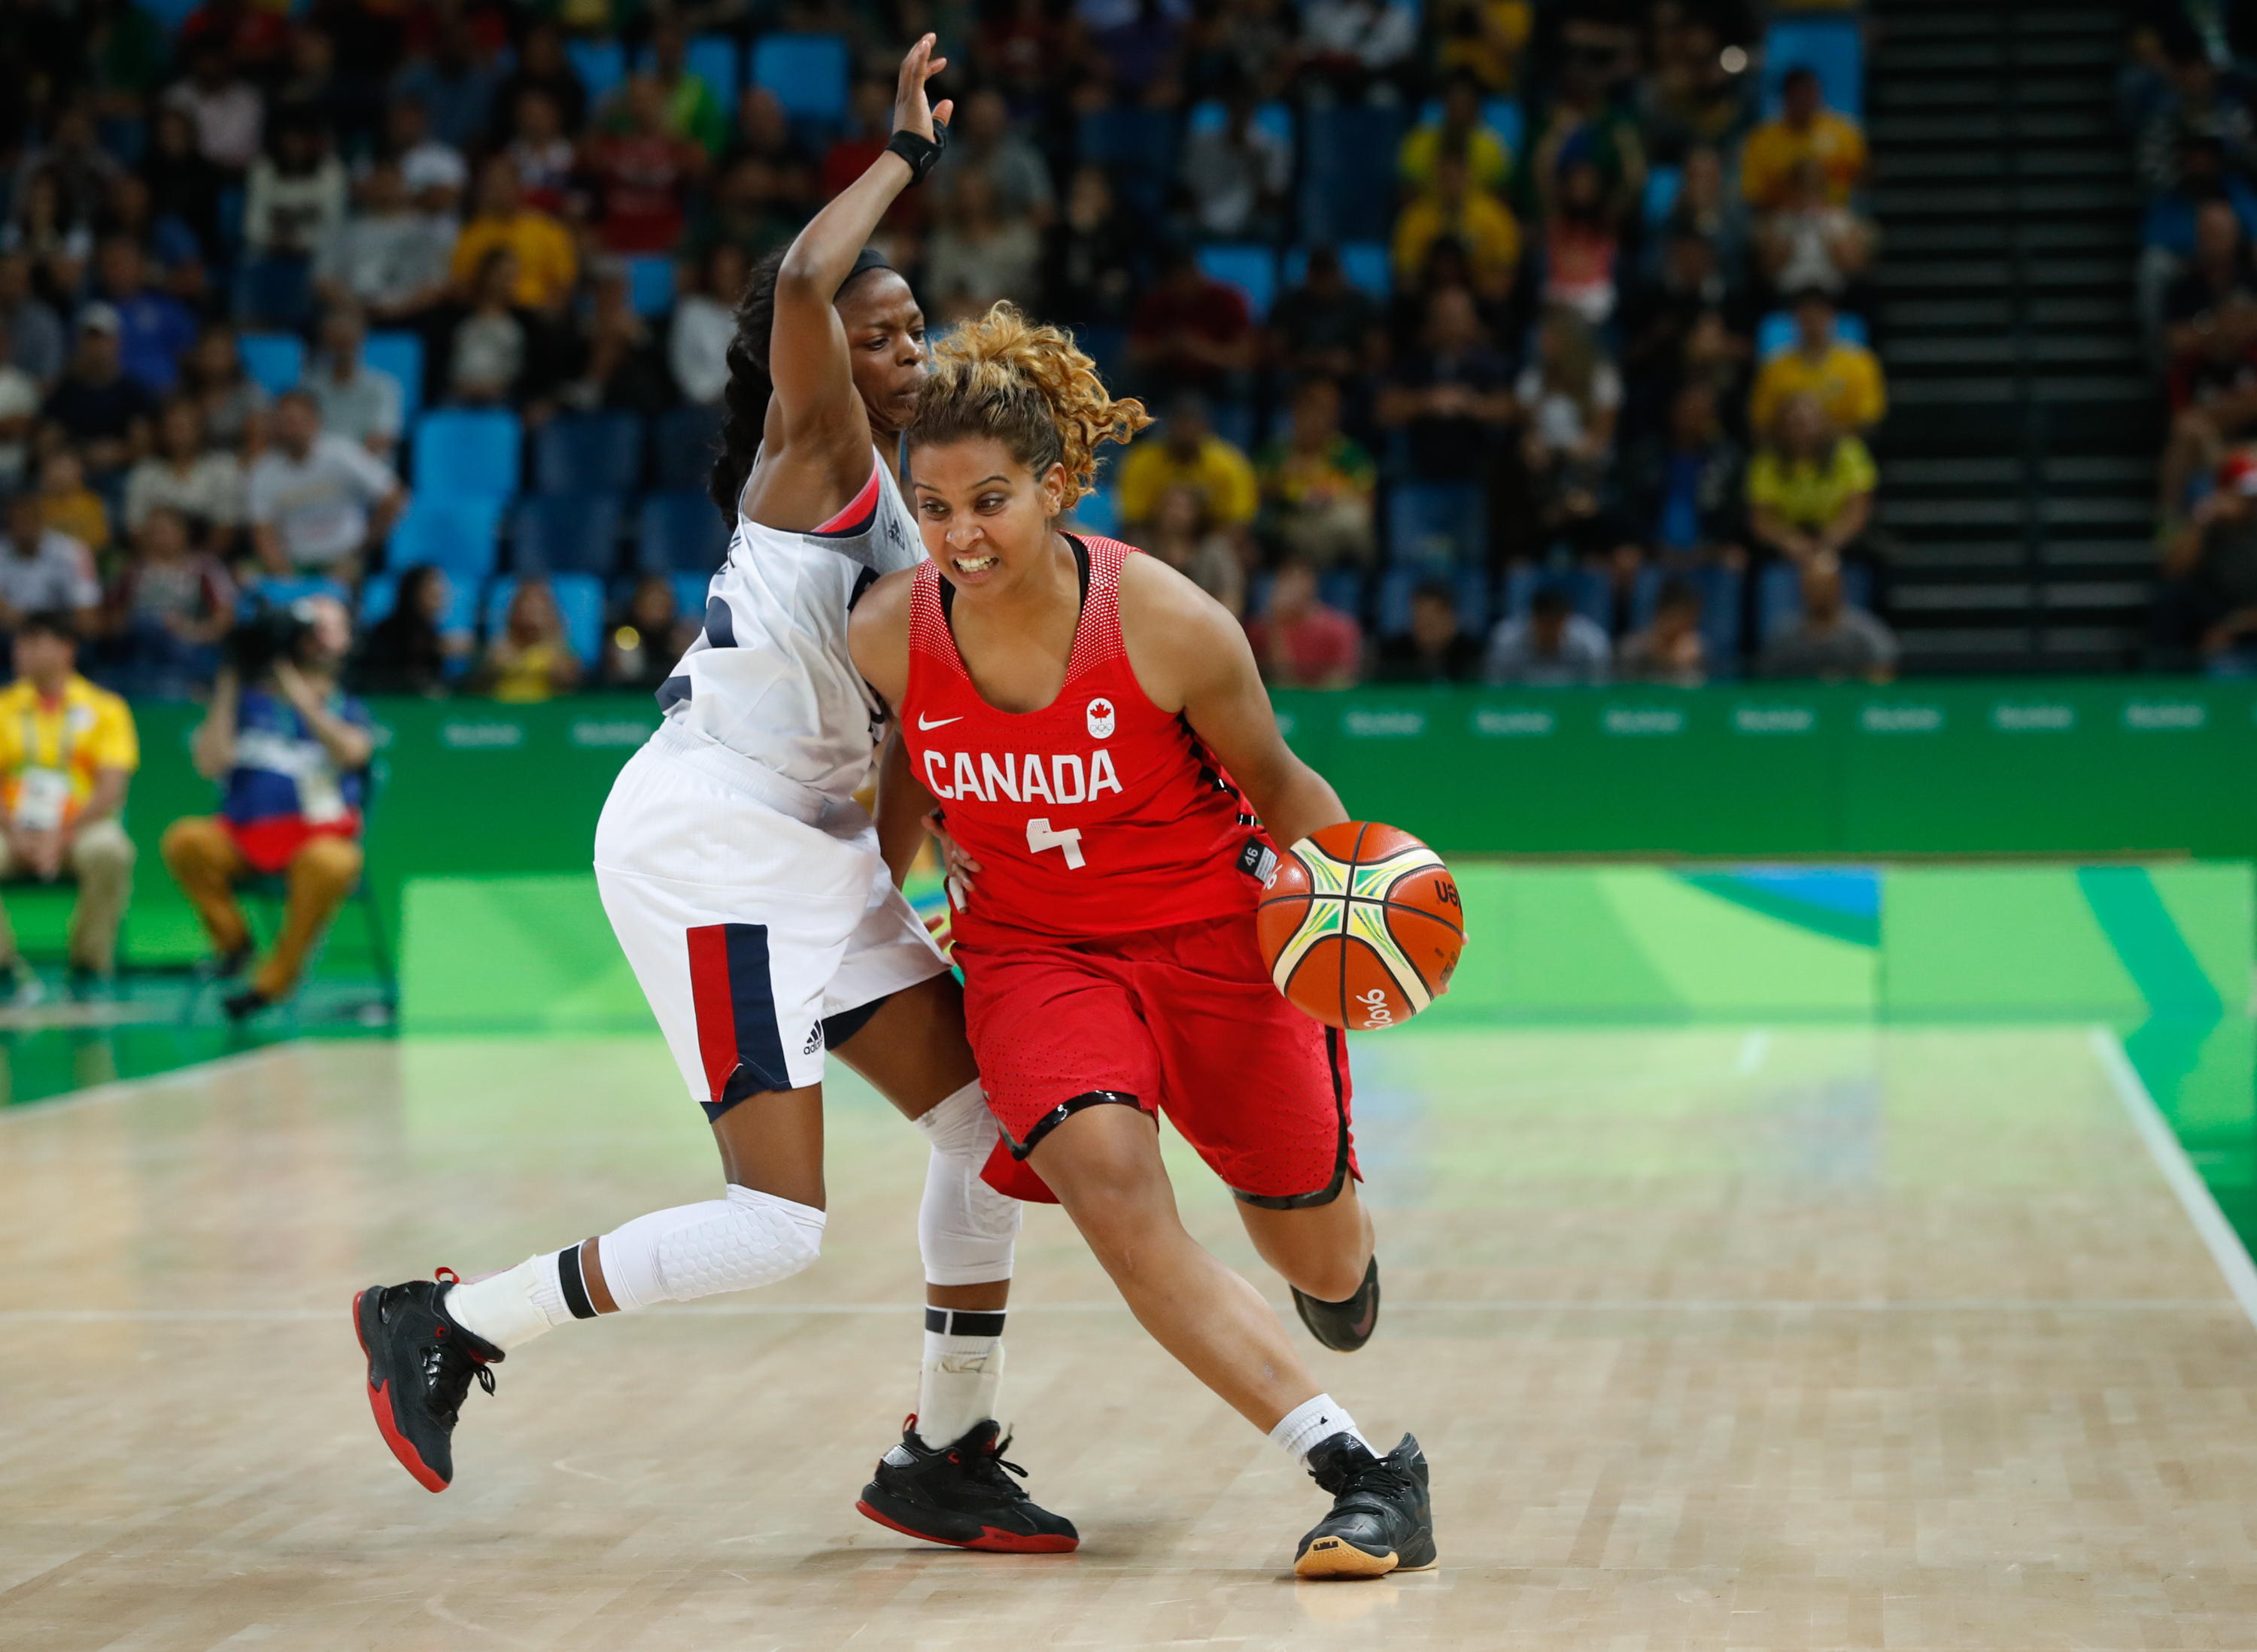 Miah-Marie Langlois competes in the quarterfinals against France during Rio 2016 on August 16, 2016 (COC/Mark Blinch)